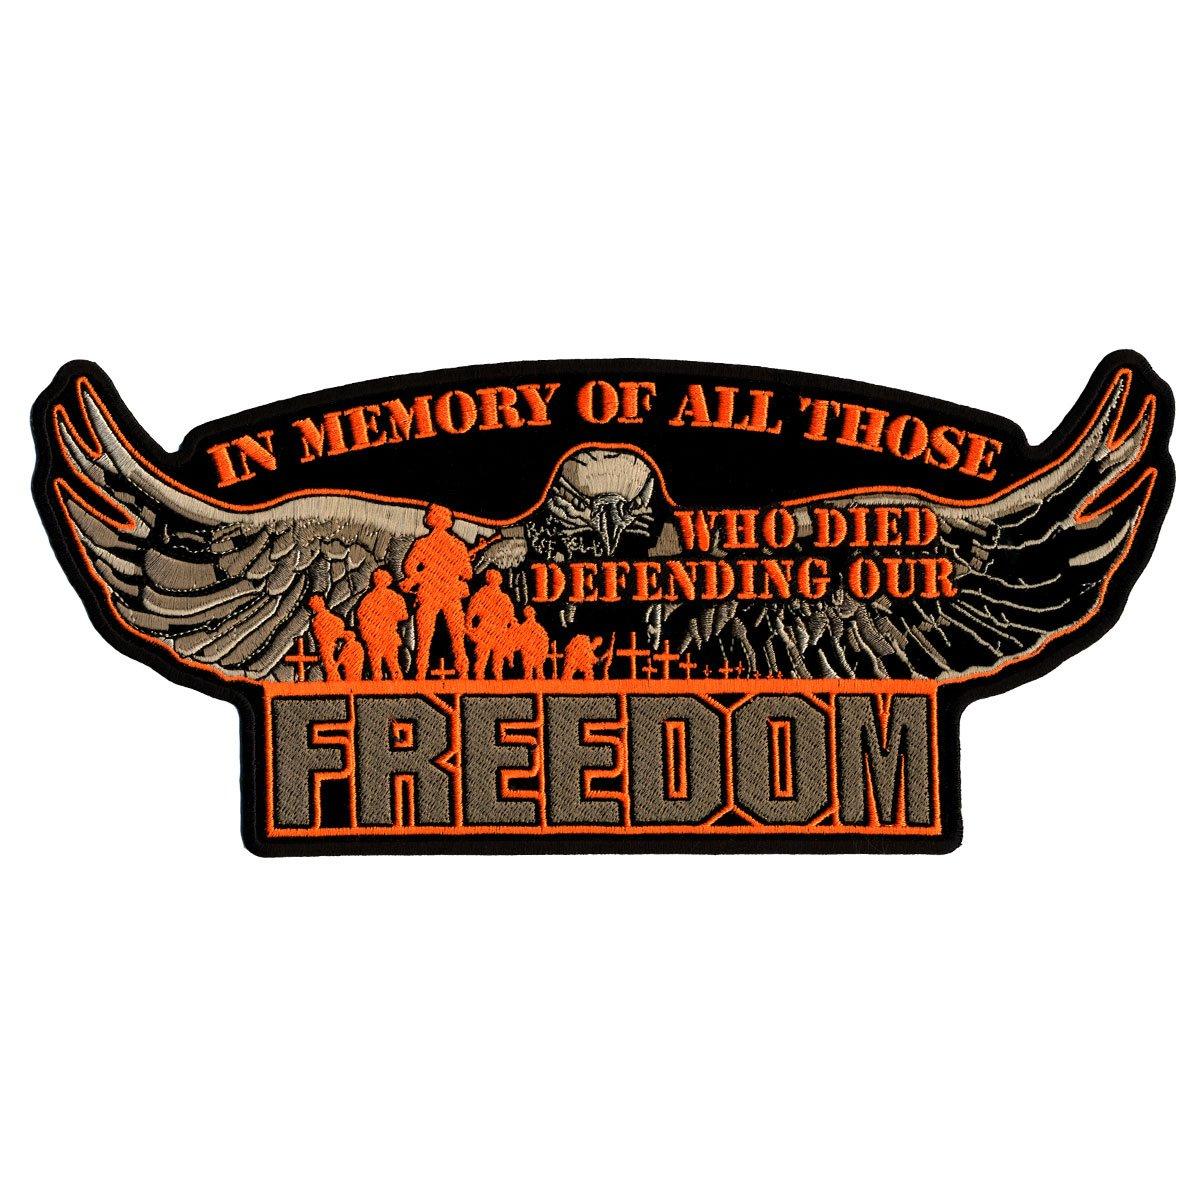 Defending Our Freedom 11" x 5" Patch - Military Republic